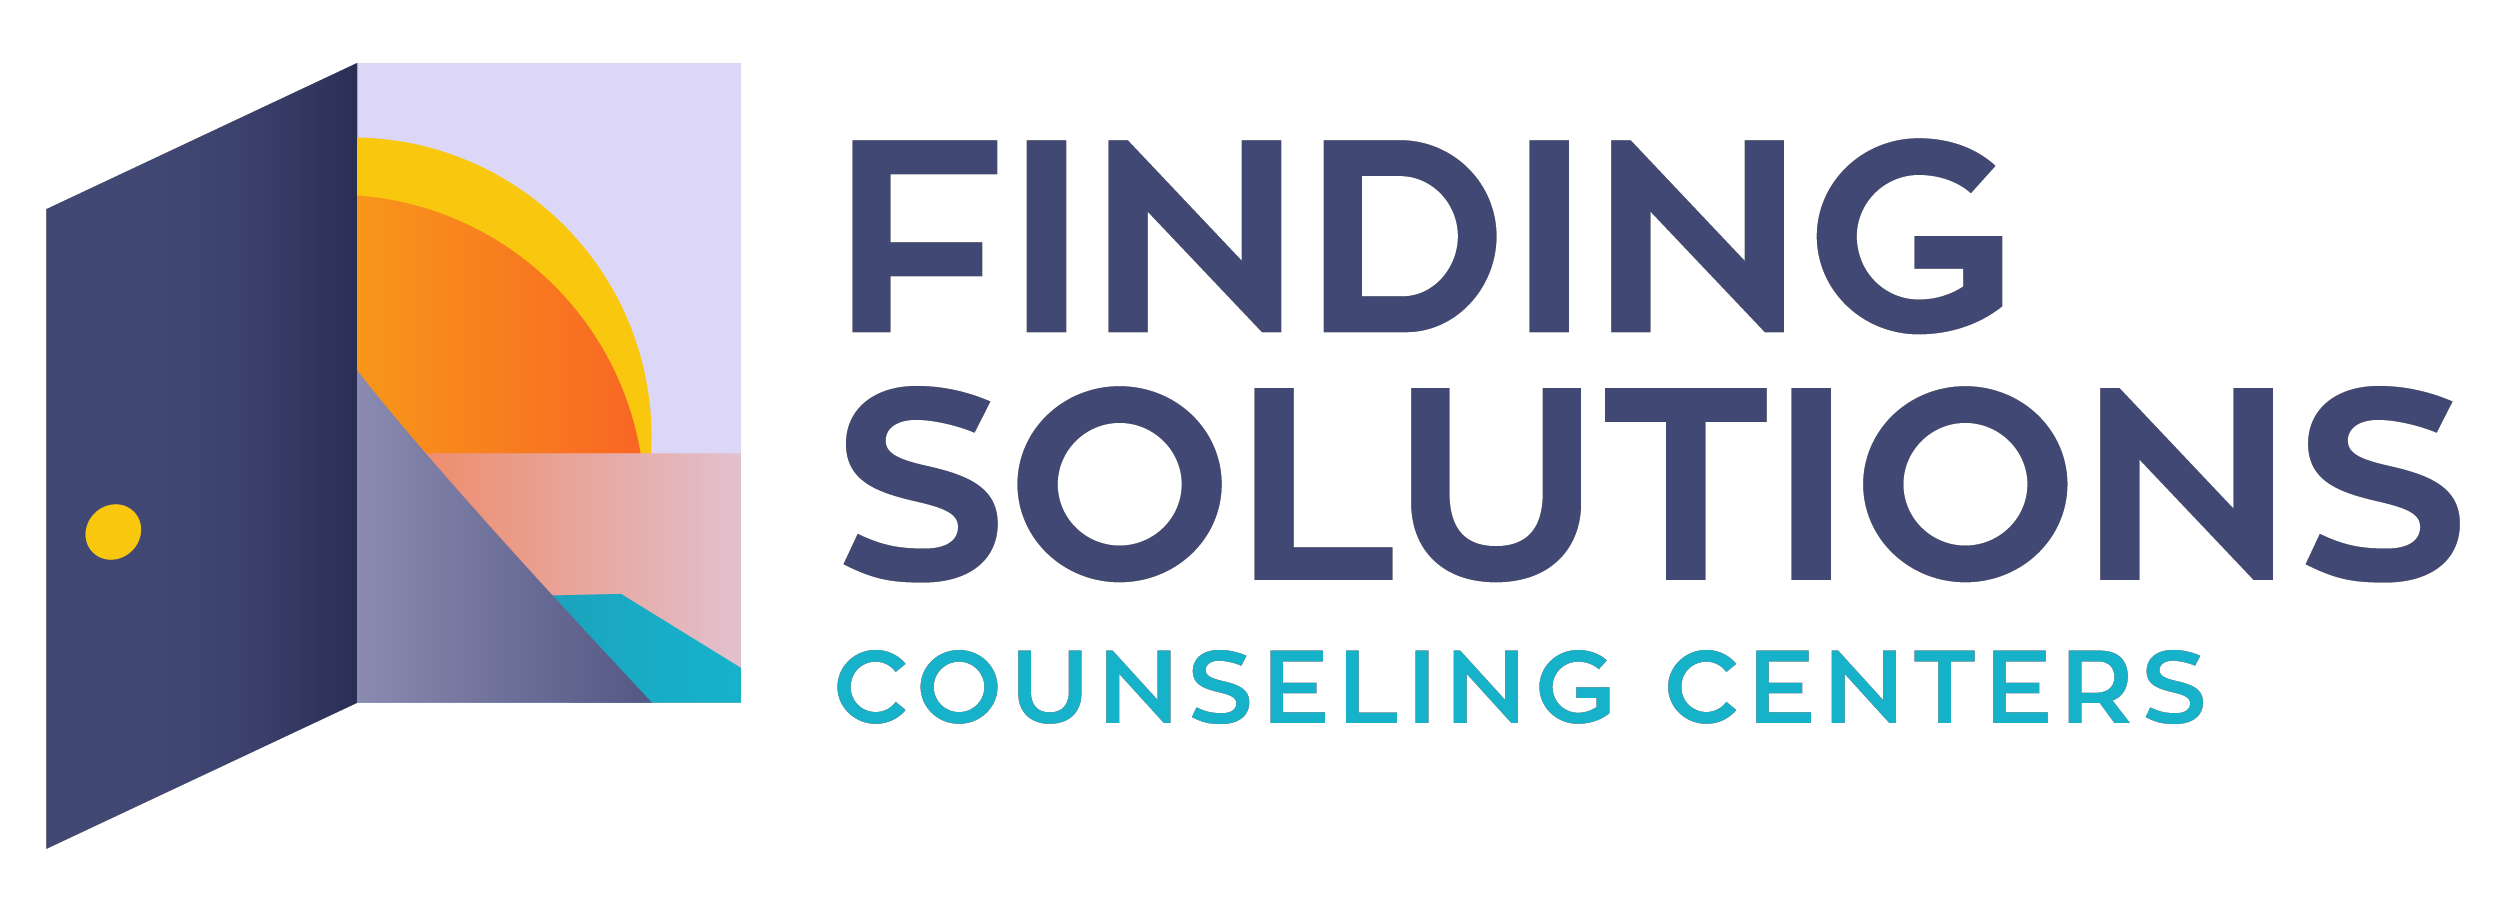 Finding Solutions Counseling Centers